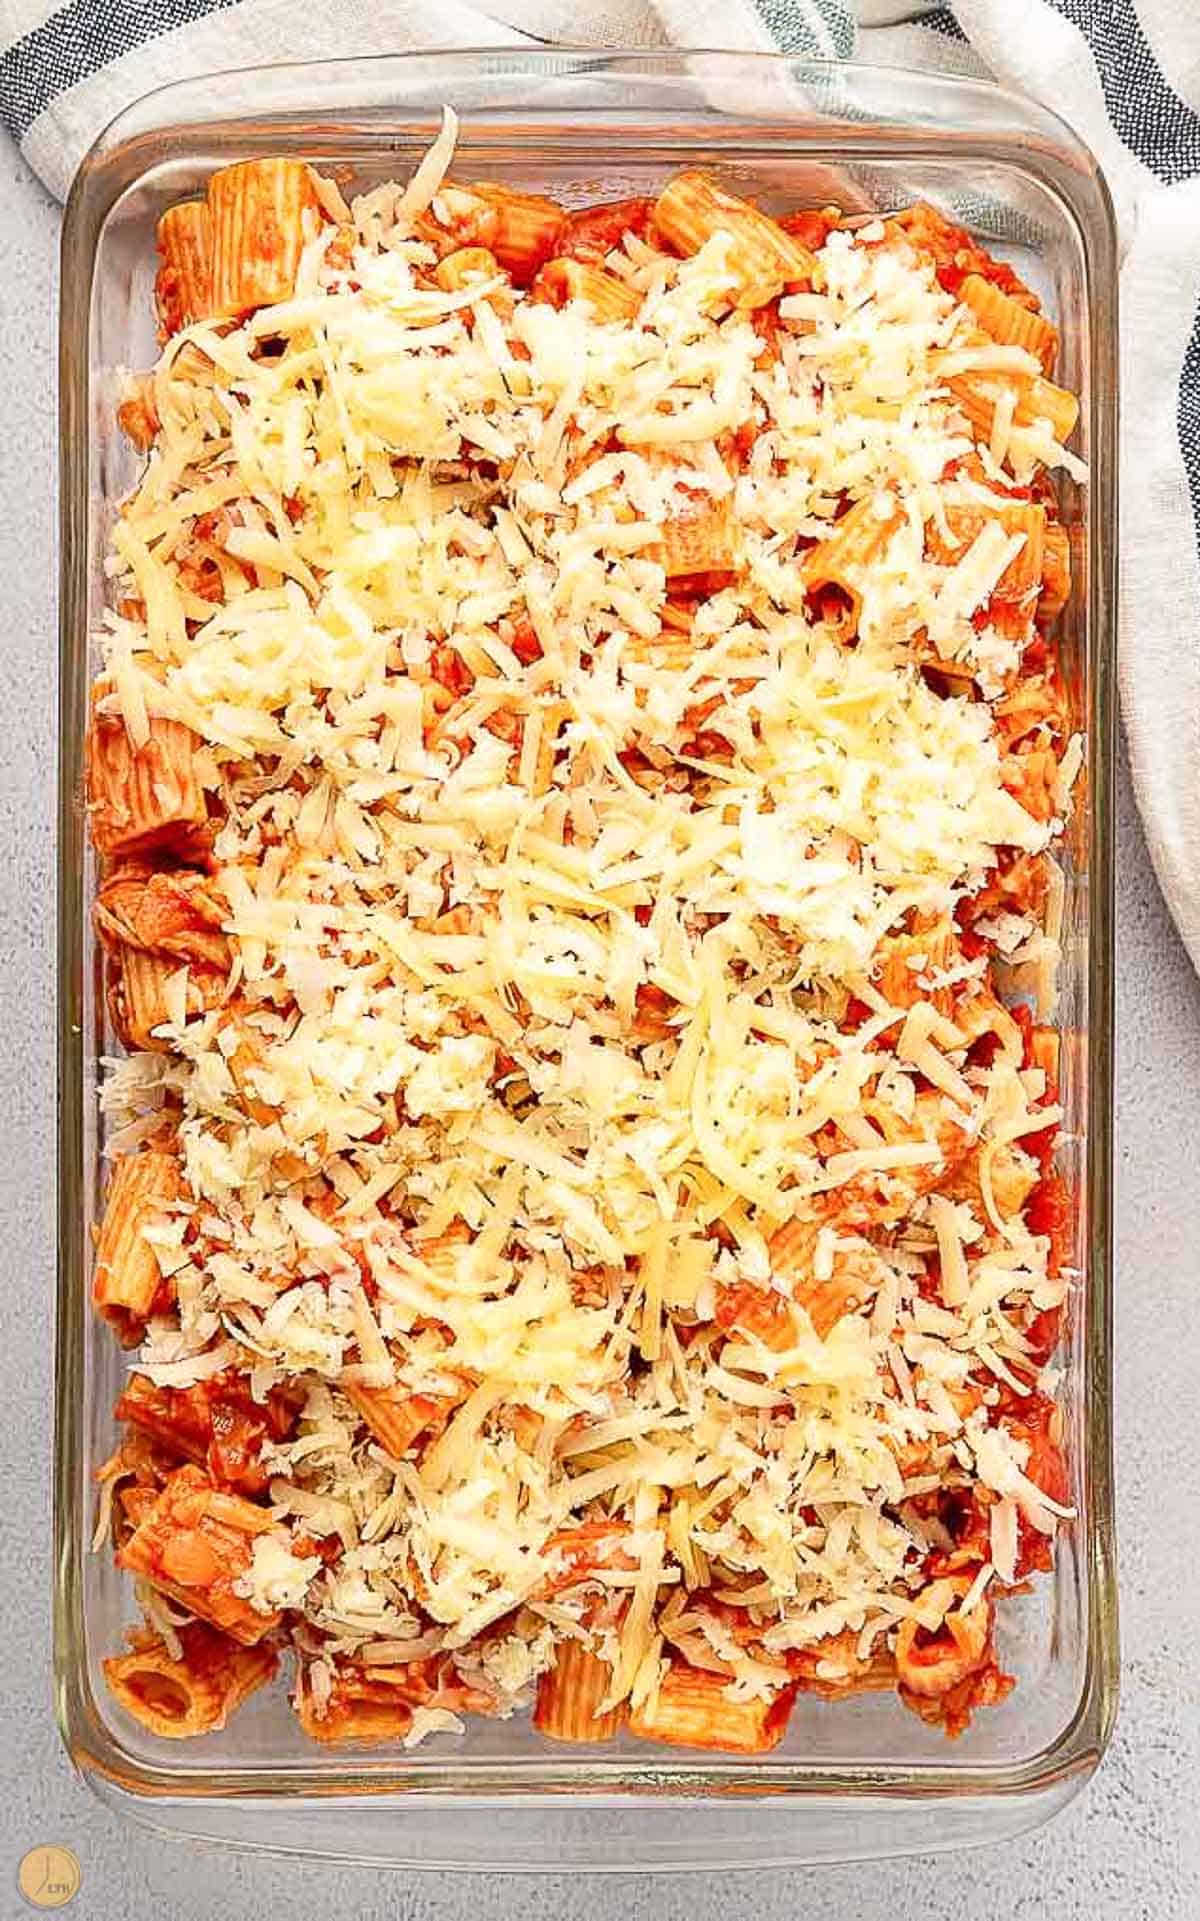 unbaked rigatoni casserole in a clear dish